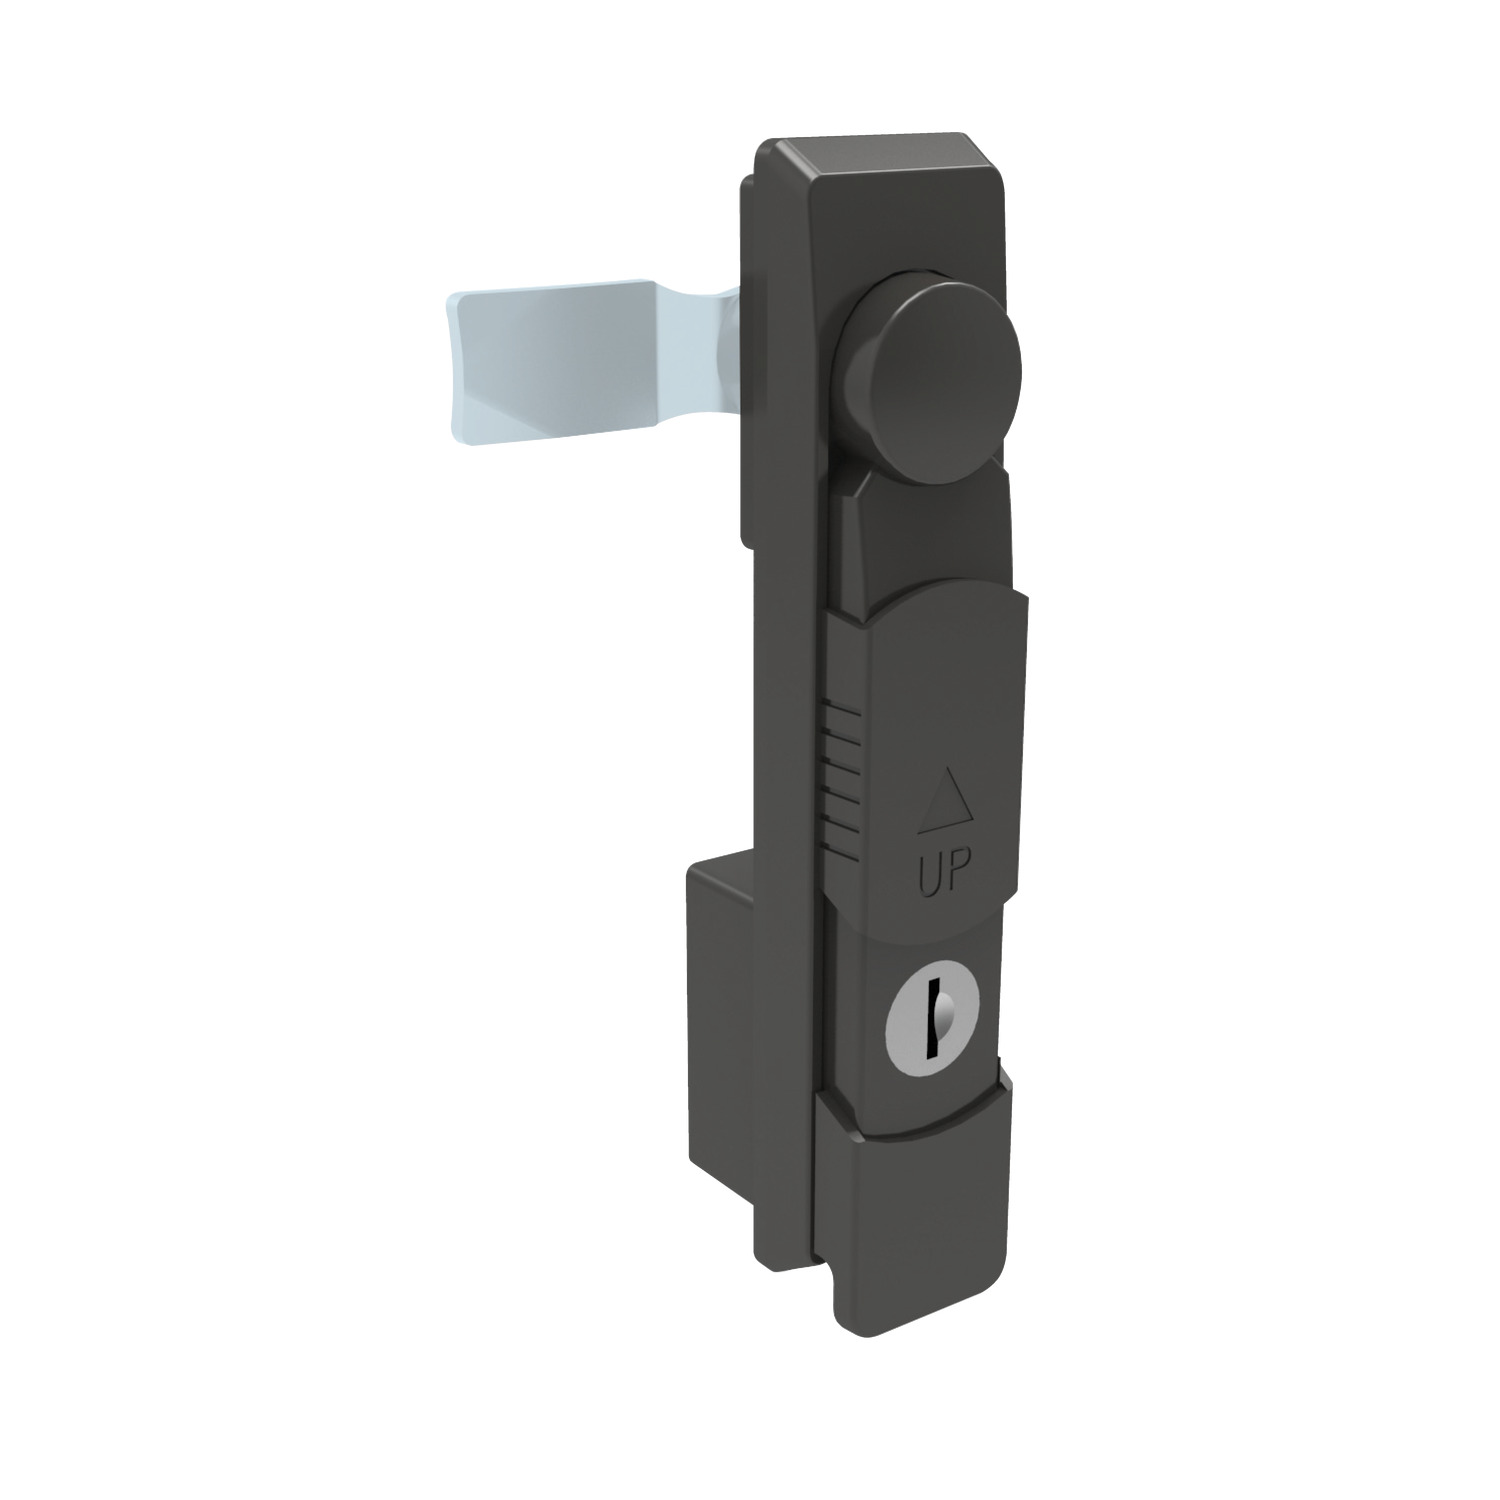 Product B1092, Swing Handles - Cam Control 40mm euro cylinder lock - dust proof cover - plastic / 